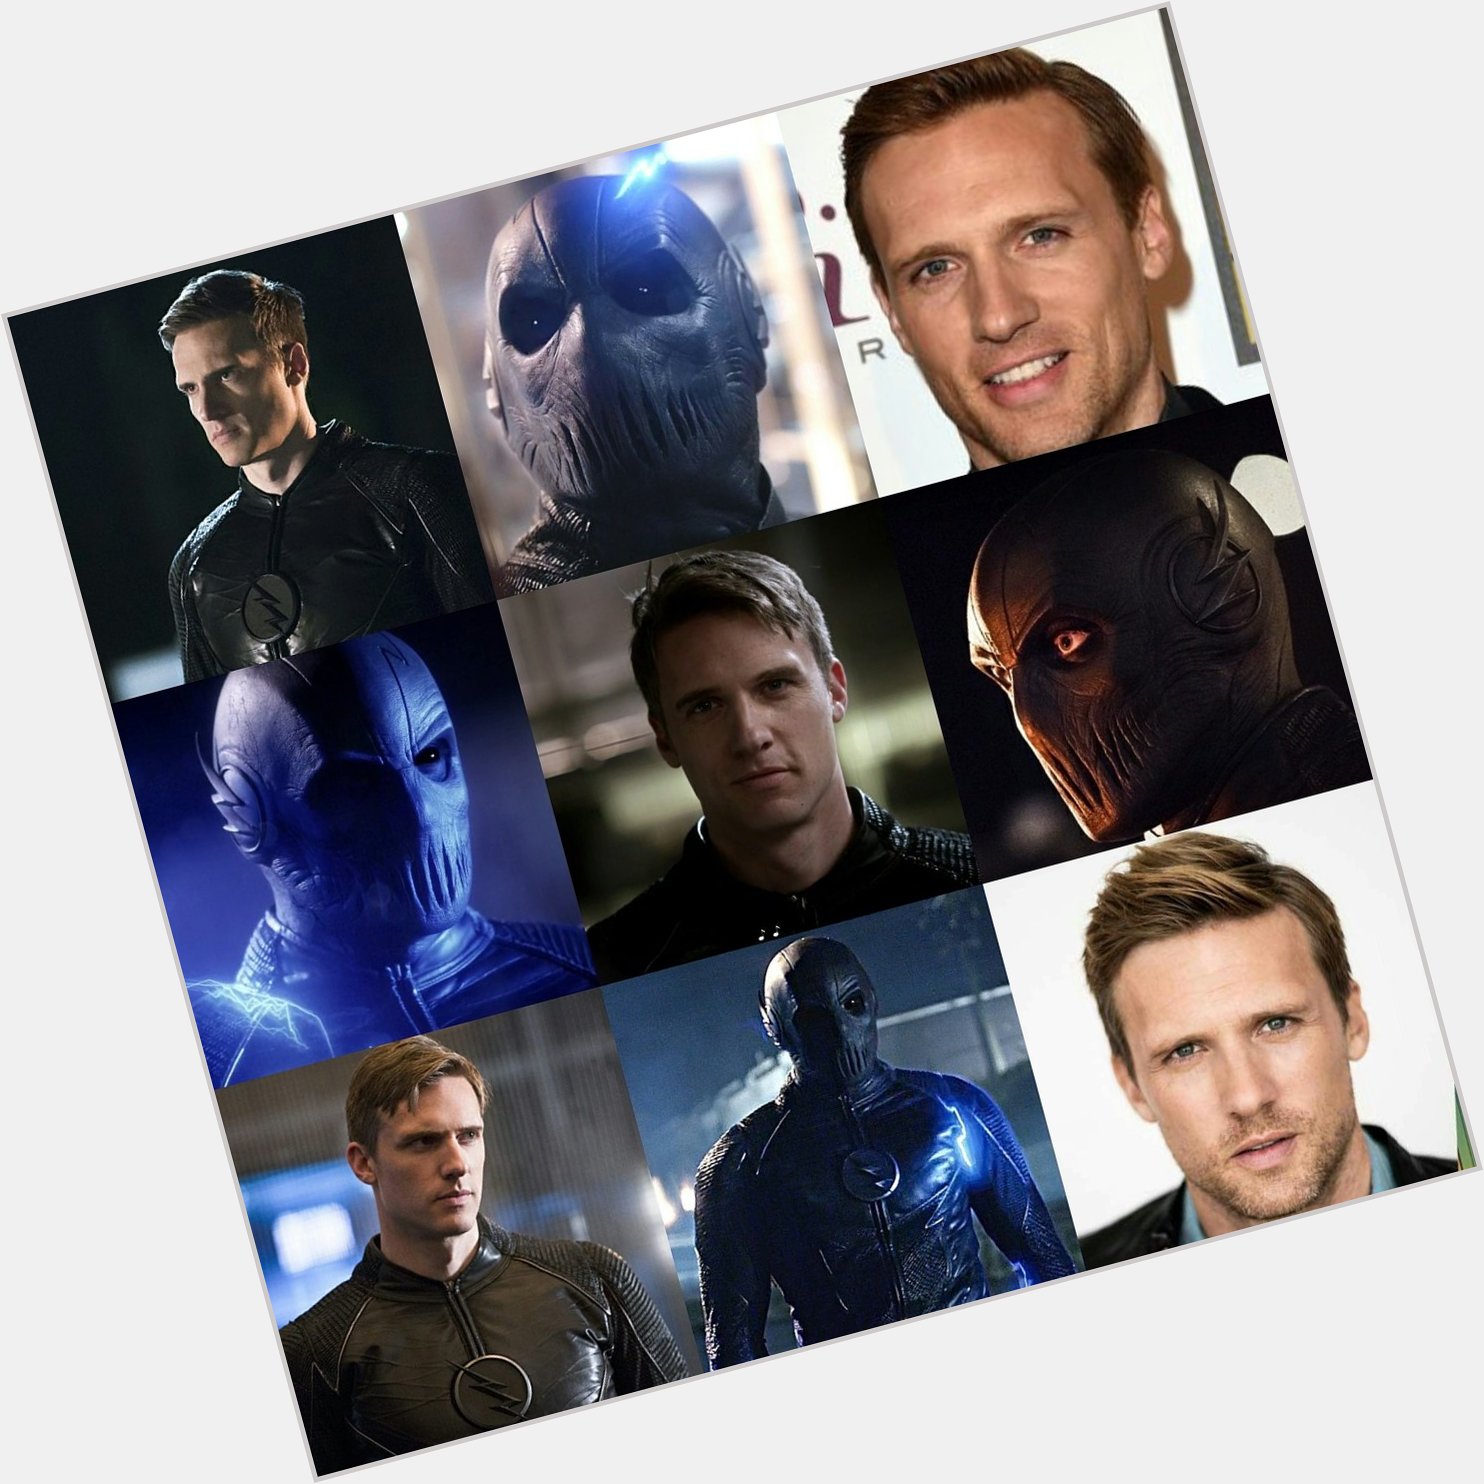 Happy birthday Teddy Sears! Turns 40 years old today 